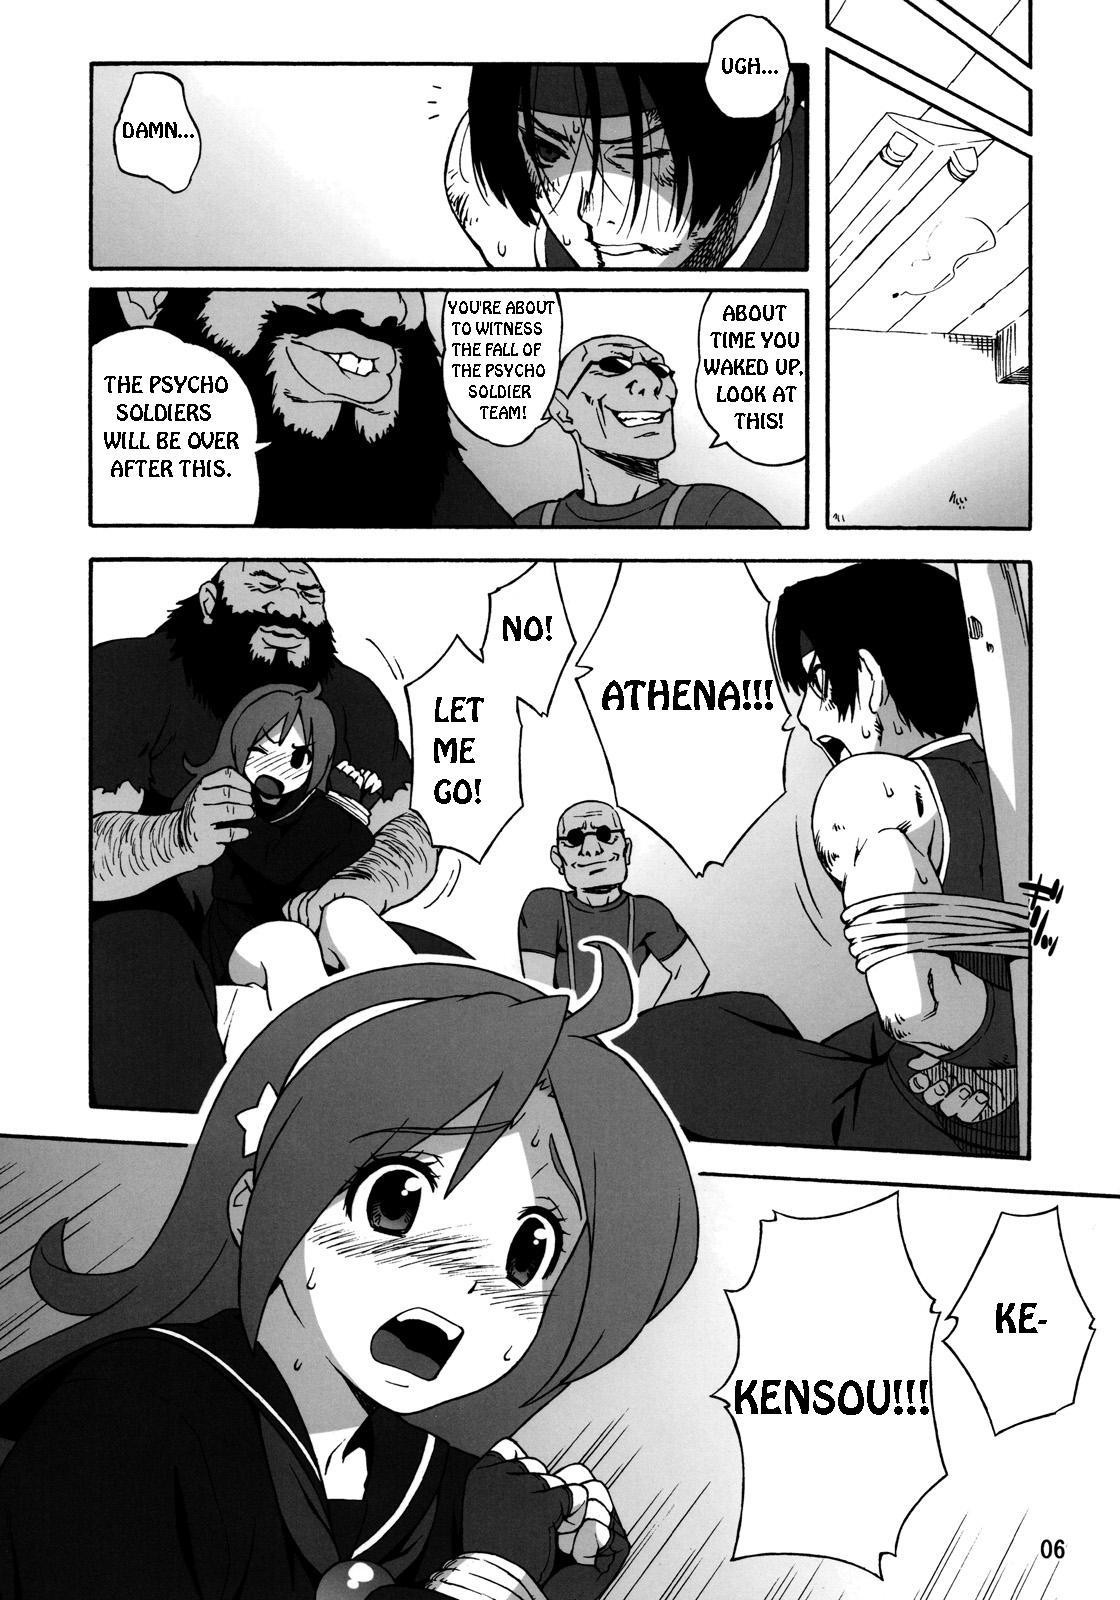 Dirty A.N.T.R. - King of fighters Desperate - Page 5